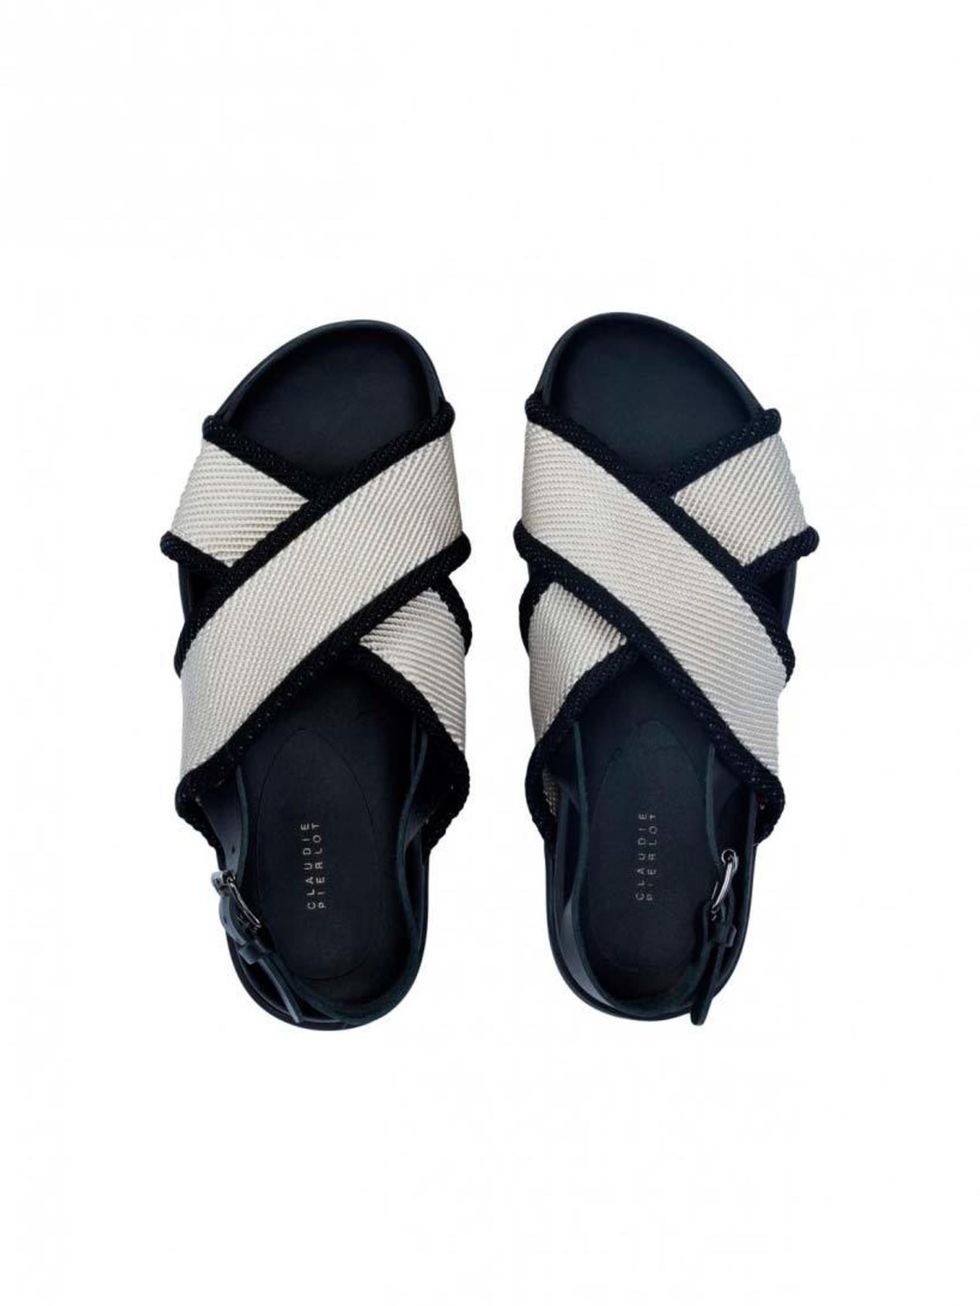 <p>Trying a chunky sandal? Keep the balance with a glossy pedicure.</p>

<p><a href="http://www.claudiepierlot.com/en_uk/chaussures-aventure-27289.html" target="_blank">Claudie Pierlot</a> sandals, £209</p>